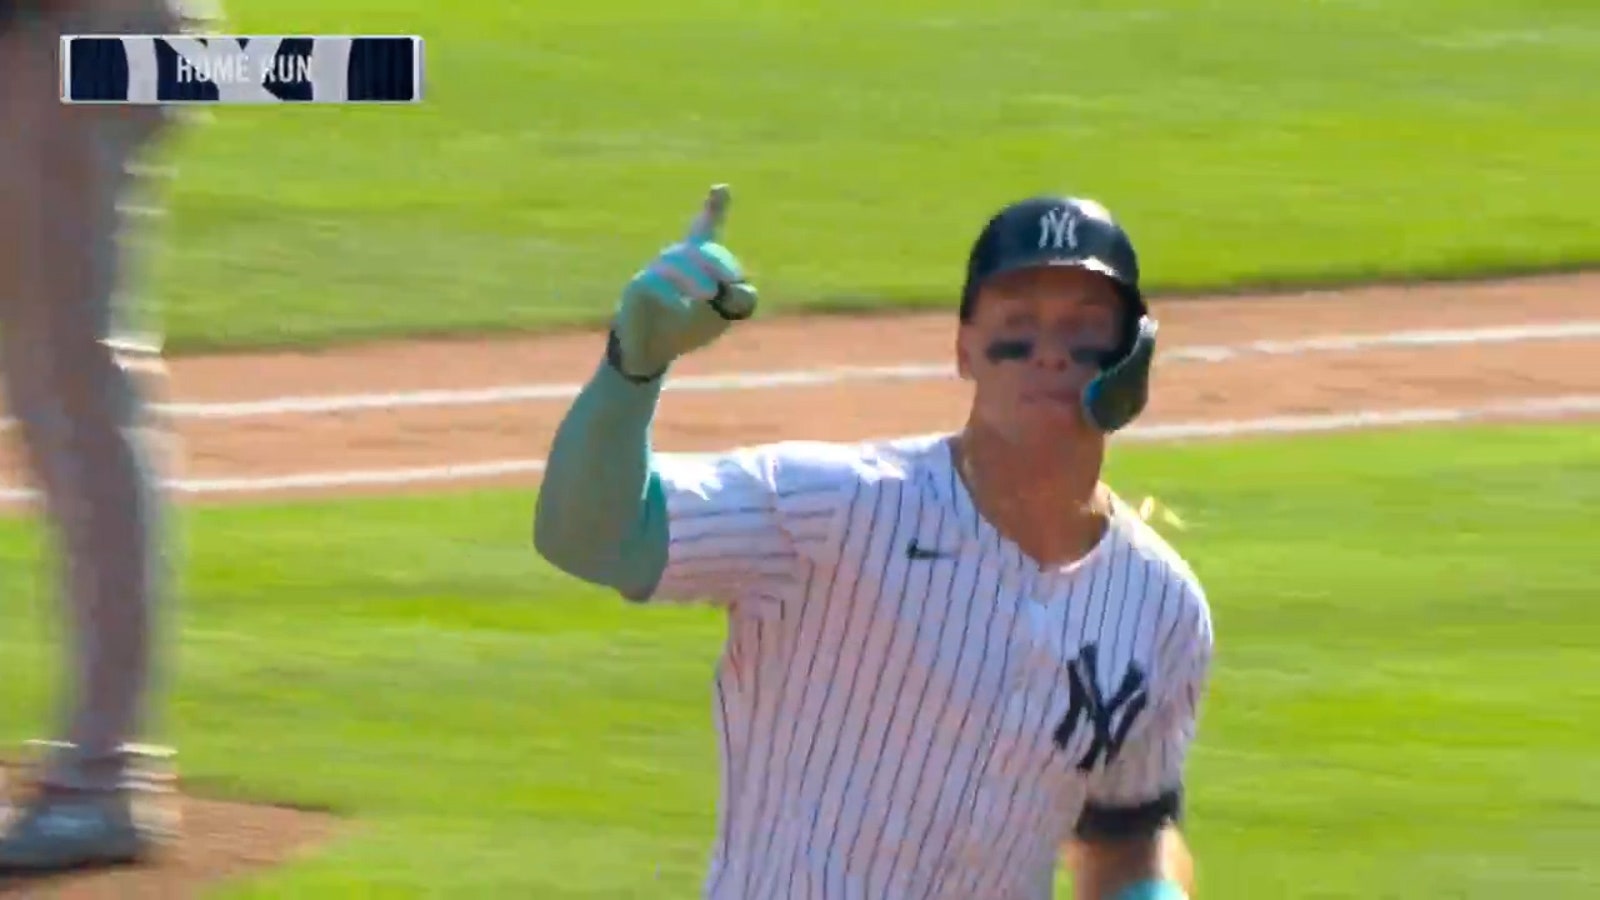 Yankees' Aaron Judge launches a two-run home run vs. Orioles